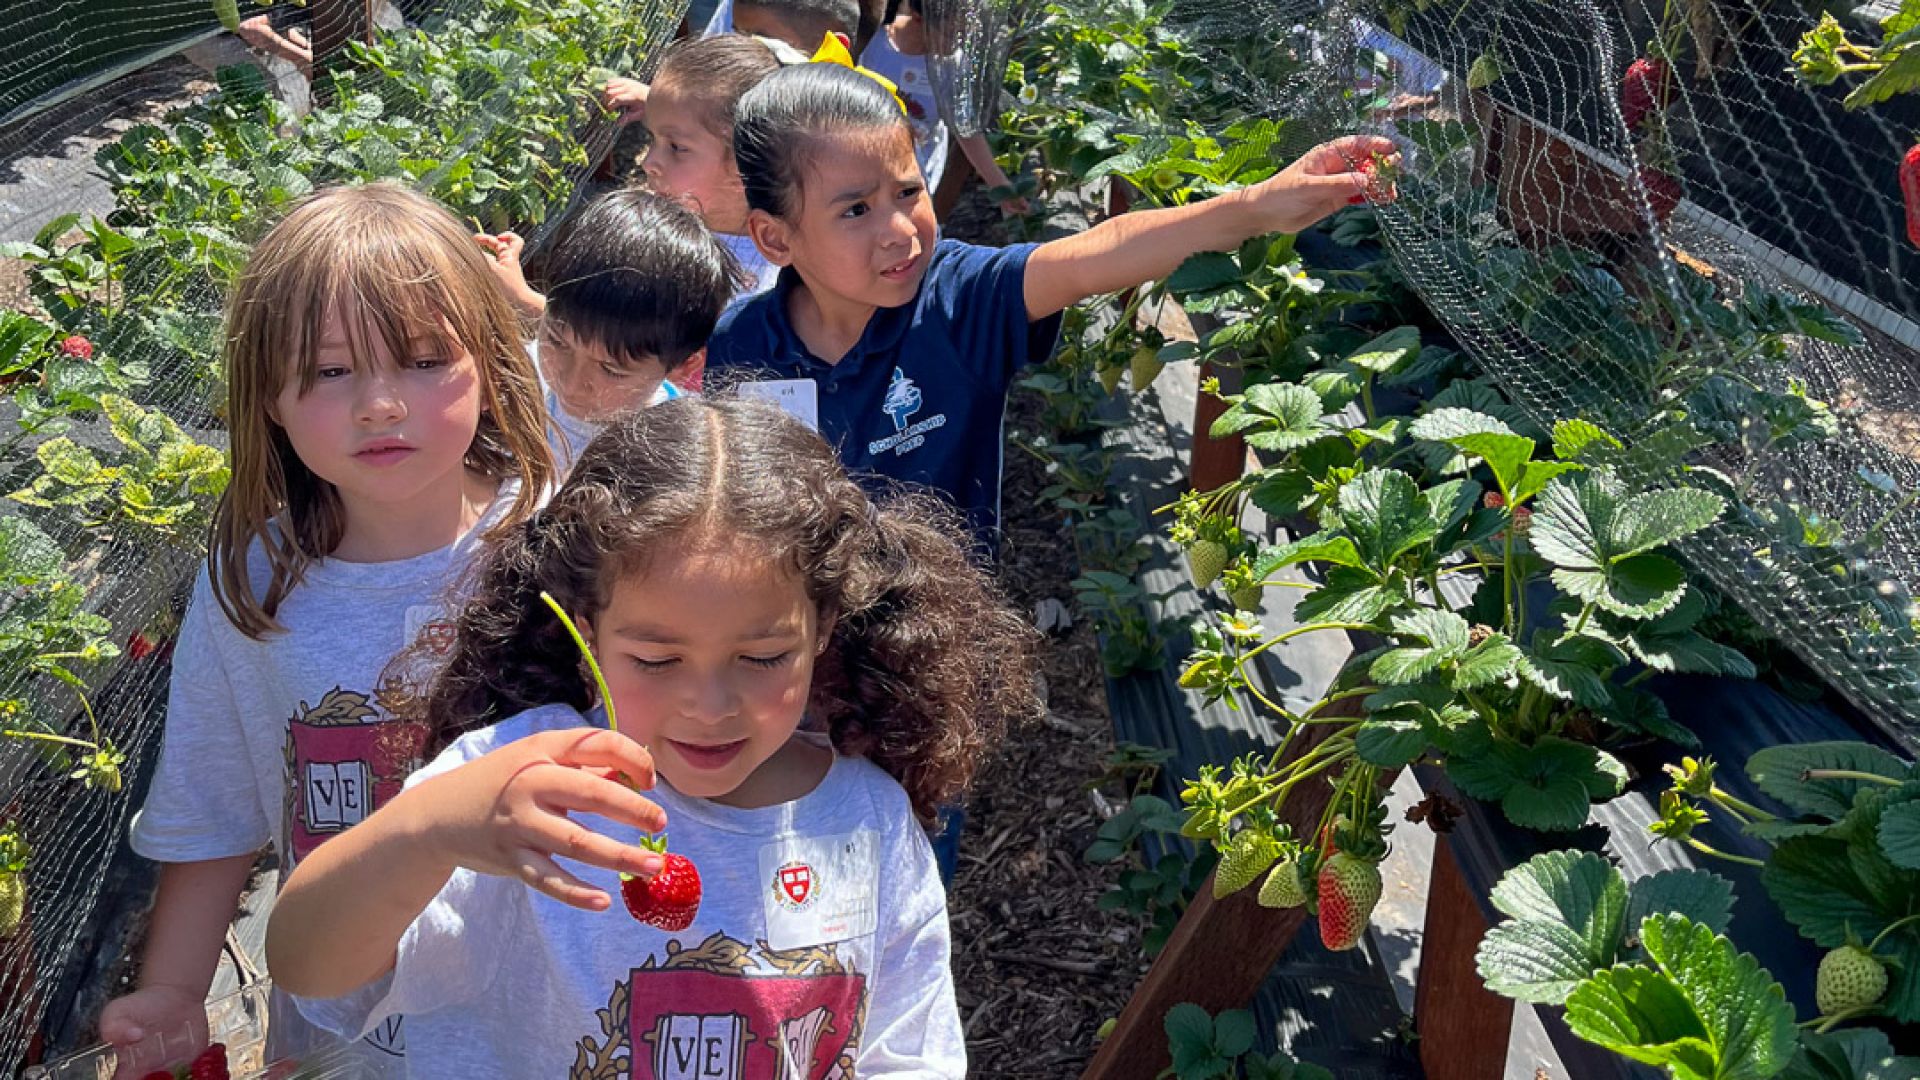 Young Scholars Explore Agriculture and Nature with Tanaka Farms Field Trip